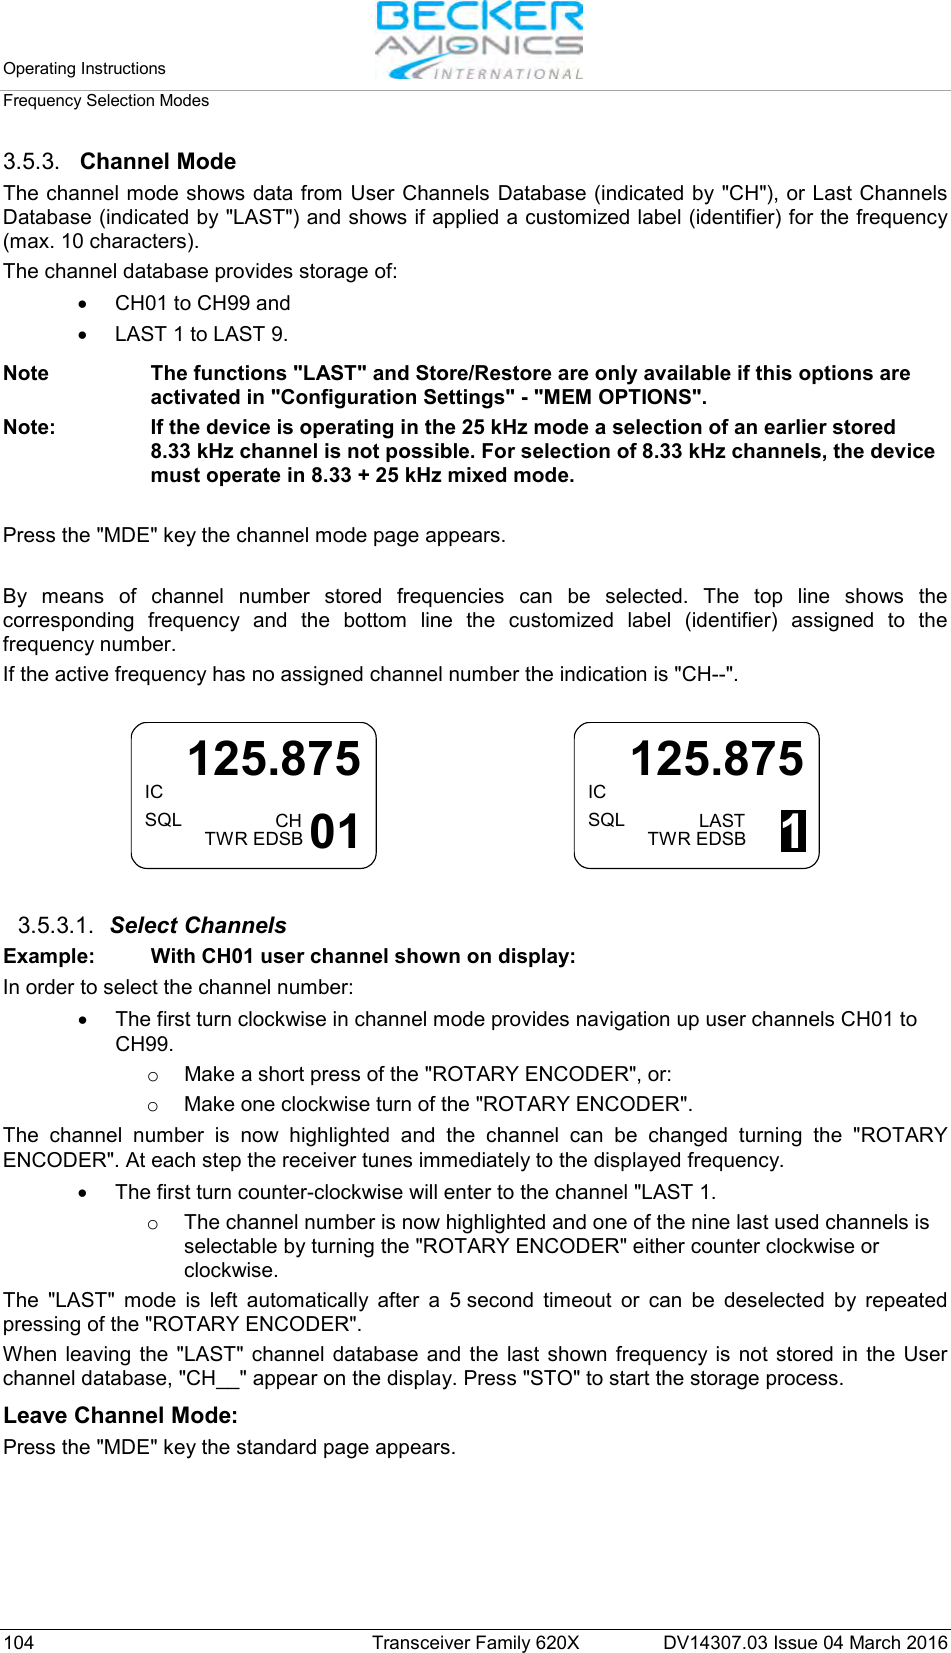 Operating Instructions   Frequency Selection Modes  104 Transceiver Family 620X DV14307.03 Issue 04 March 2016 3.5.3. Channel Mode The channel mode shows data from User Channels Database (indicated by &quot;CH&quot;), or Last Channels Database (indicated by &quot;LAST&quot;) and shows if applied a customized label (identifier) for the frequency (max. 10 characters).  The channel database provides storage of: • CH01 to CH99 and  • LAST 1 to LAST 9.  Note The functions &quot;LAST&quot; and Store/Restore are only available if this options are activated in &quot;Configuration Settings&quot; - &quot;MEM OPTIONS&quot;. Note: If the device is operating in the 25 kHz mode a selection of an earlier stored 8.33 kHz channel is not possible. For selection of 8.33 kHz channels, the device must operate in 8.33 + 25 kHz mixed mode.  Press the &quot;MDE&quot; key the channel mode page appears.   By means of channel number stored frequencies can be selected. The top line shows the corresponding frequency  and the bottom line the customized  label (identifier) assigned to the frequency number.  If the active frequency has no assigned channel number the indication is &quot;CH--&quot;.  ICSQL125.875CHTWR EDSB 01     ICSQL125.875LASTTWR EDSB 1  3.5.3.1. Select Channels Example:  With CH01 user channel shown on display: In order to select the channel number: • The first turn clockwise in channel mode provides navigation up user channels CH01 to CH99.  o Make a short press of the &quot;ROTARY ENCODER&quot;, or: o Make one clockwise turn of the &quot;ROTARY ENCODER&quot;. The channel number is now highlighted and the channel can be changed turning the &quot;ROTARY ENCODER&quot;. At each step the receiver tunes immediately to the displayed frequency. • The first turn counter-clockwise will enter to the channel &quot;LAST 1.  o The channel number is now highlighted and one of the nine last used channels is selectable by turning the &quot;ROTARY ENCODER&quot; either counter clockwise or clockwise. The  &quot;LAST&quot;  mode is left automatically after a 5 second timeout or can be deselected by repeated pressing of the &quot;ROTARY ENCODER&quot;. When leaving the &quot;LAST&quot;  channel database and the last shown frequency is not stored in the User channel database, &quot;CH__&quot; appear on the display. Press &quot;STO&quot; to start the storage process. Leave Channel Mode: Press the &quot;MDE&quot; key the standard page appears.  